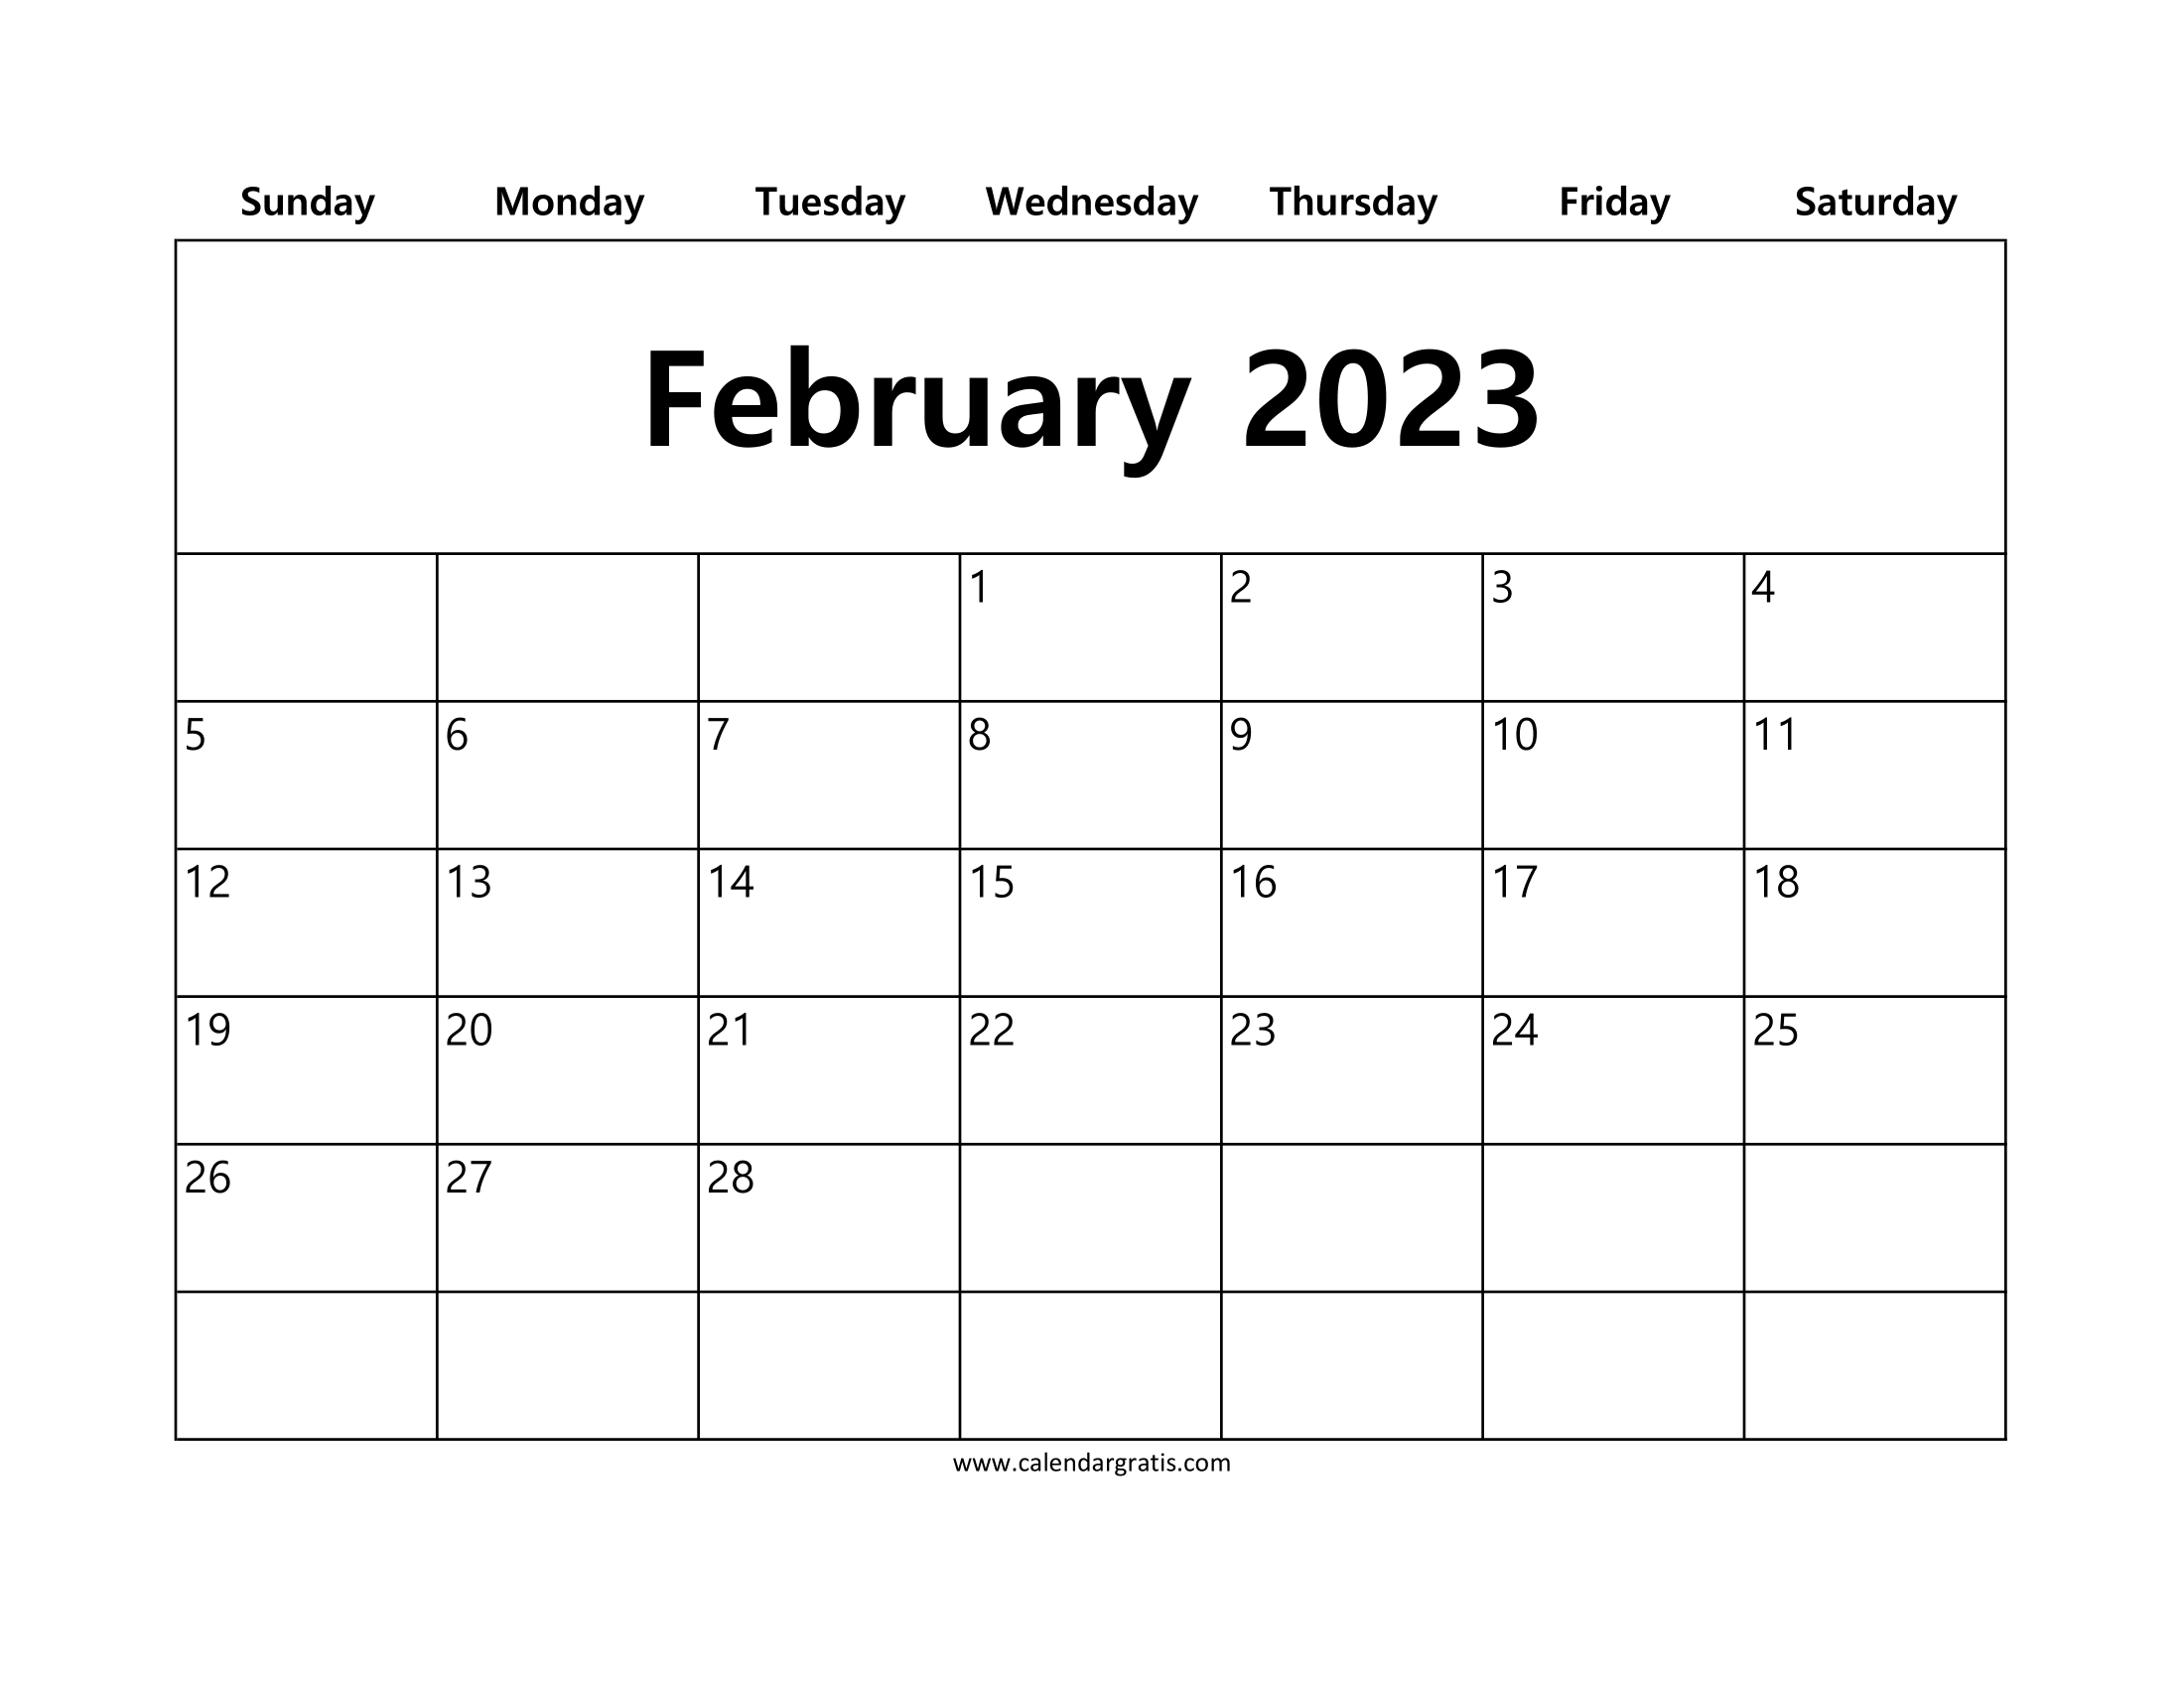 Free printable February 2023 calendar with simple white background layout.